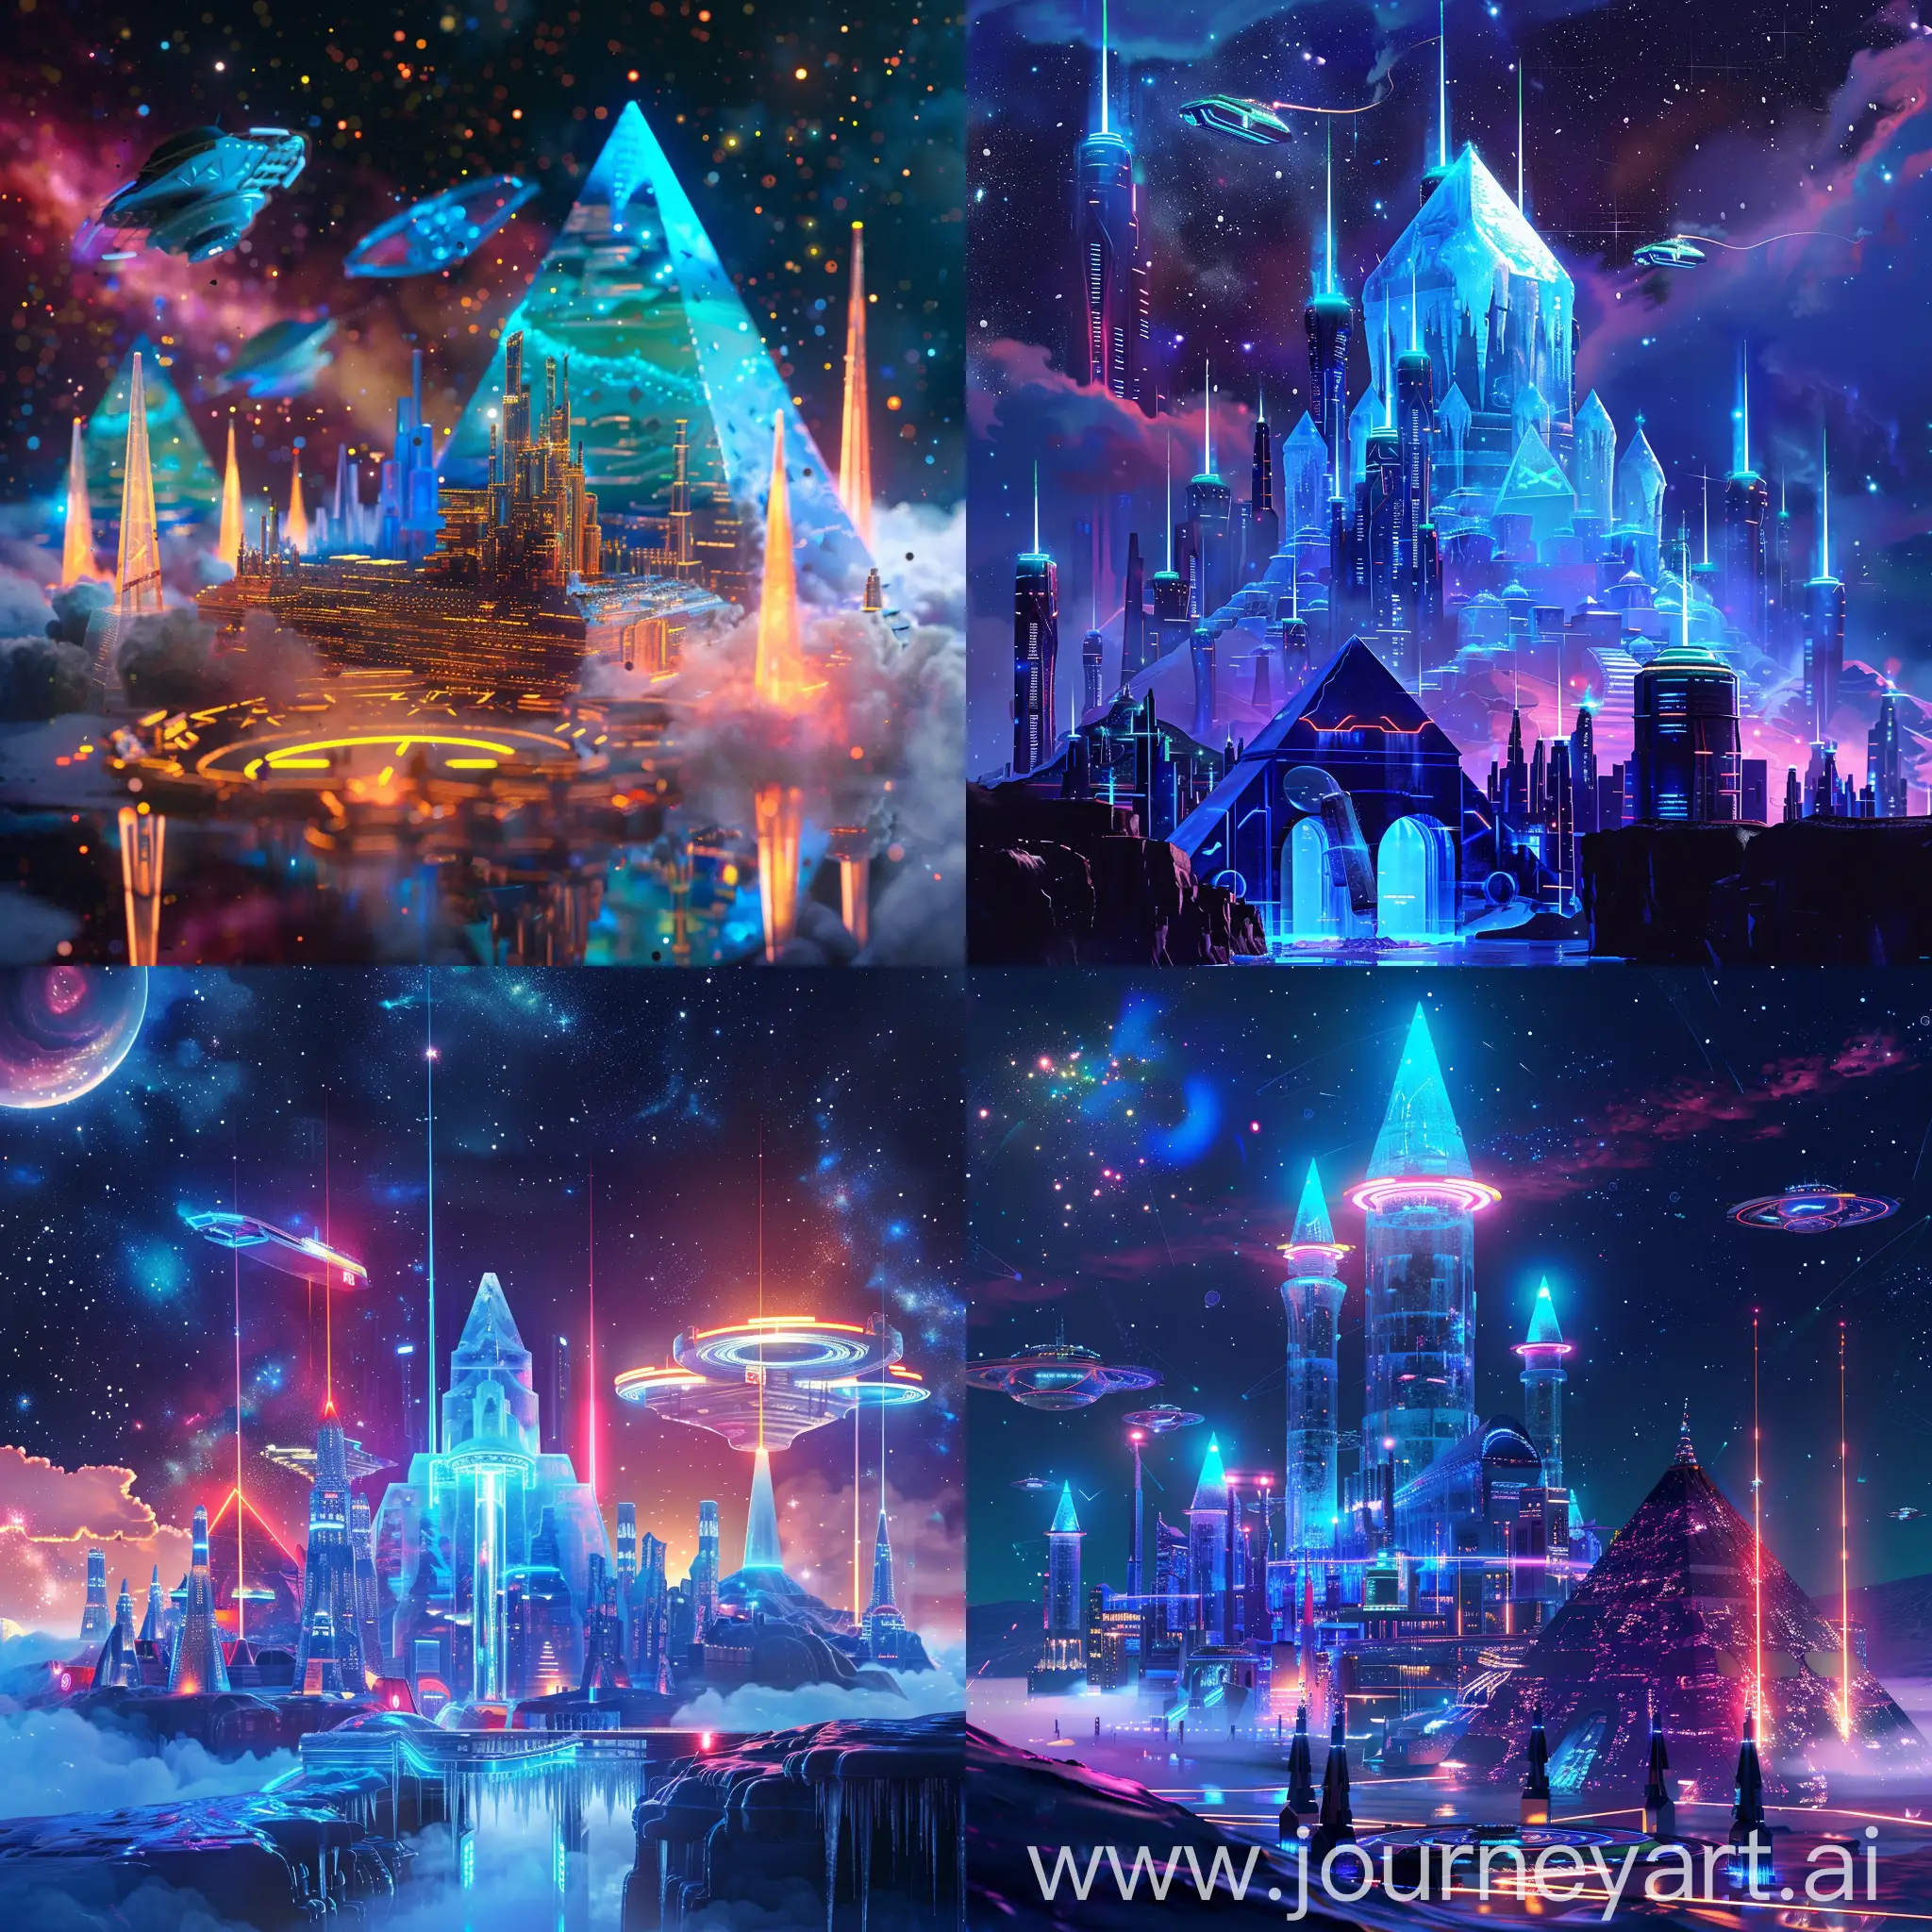 galactic futur city with cosmic ice castle transparent, stargate, cosmic sky galaxie, starship, abstact futuristic neon background, glowing pyramids

